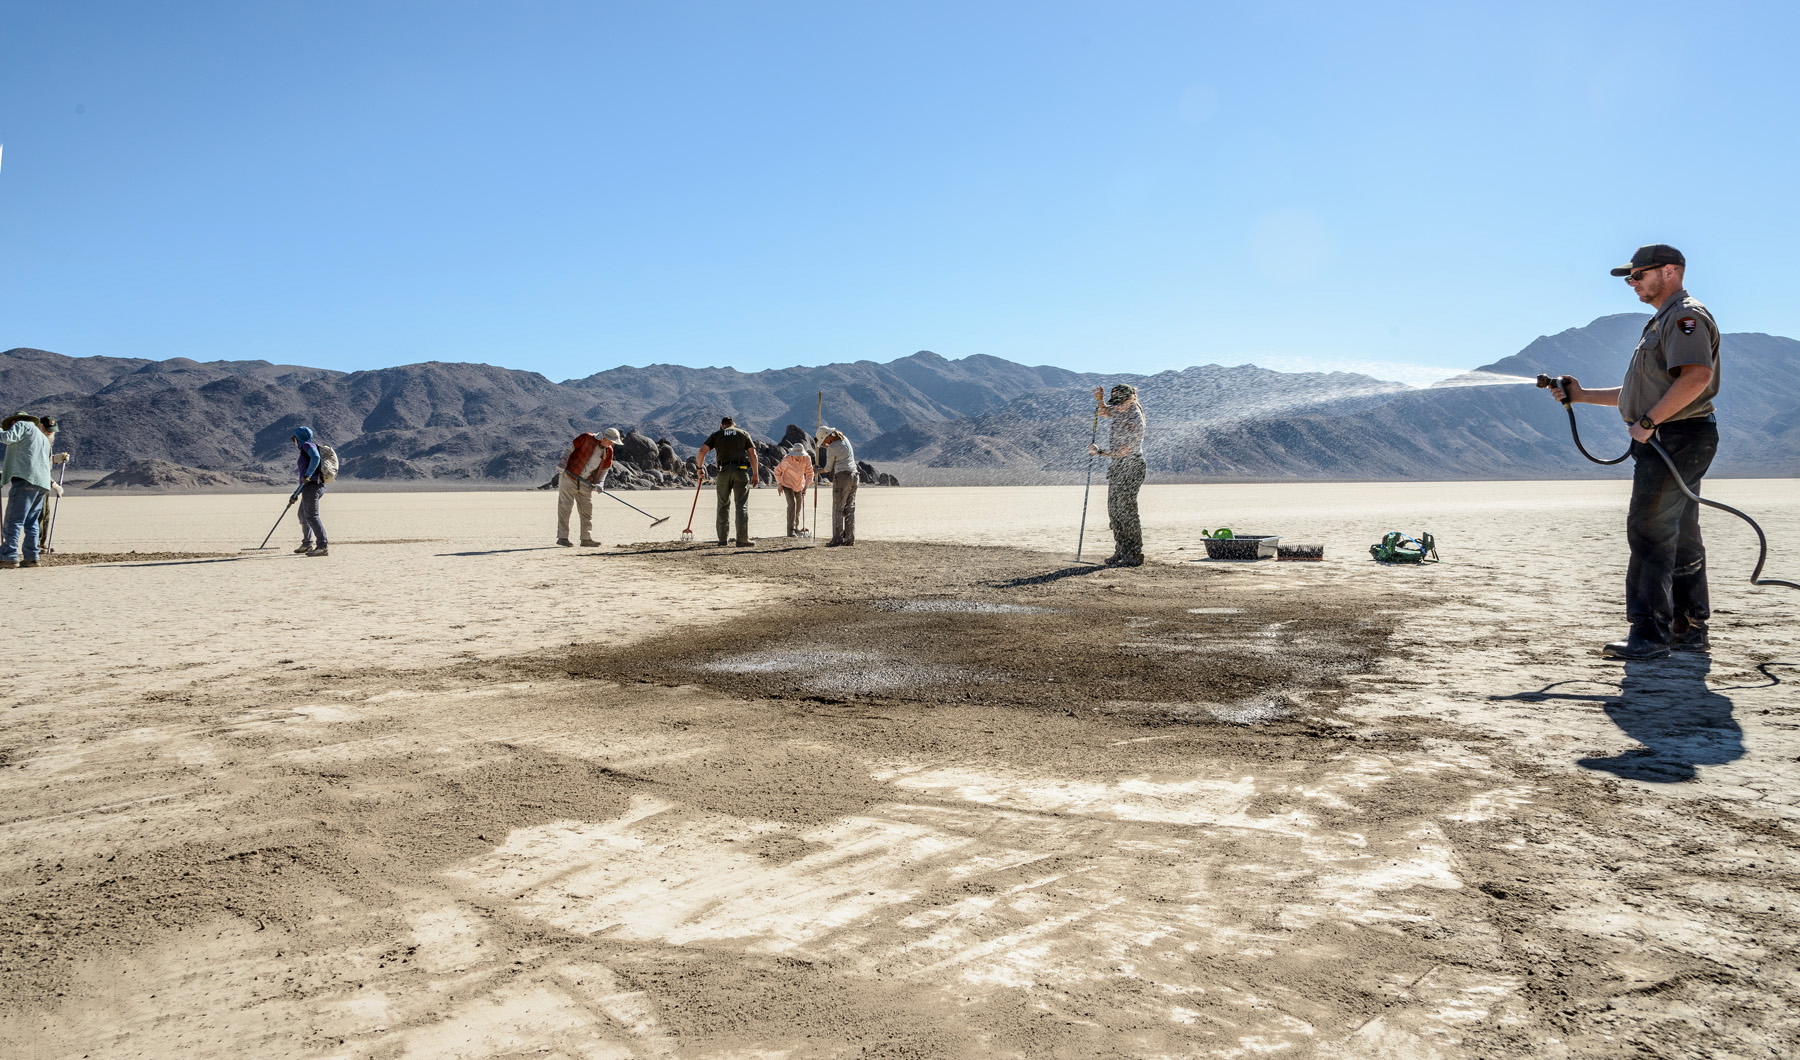 A group of people are raking and watering a large flat playa, where road tracks had been left in the dirt.